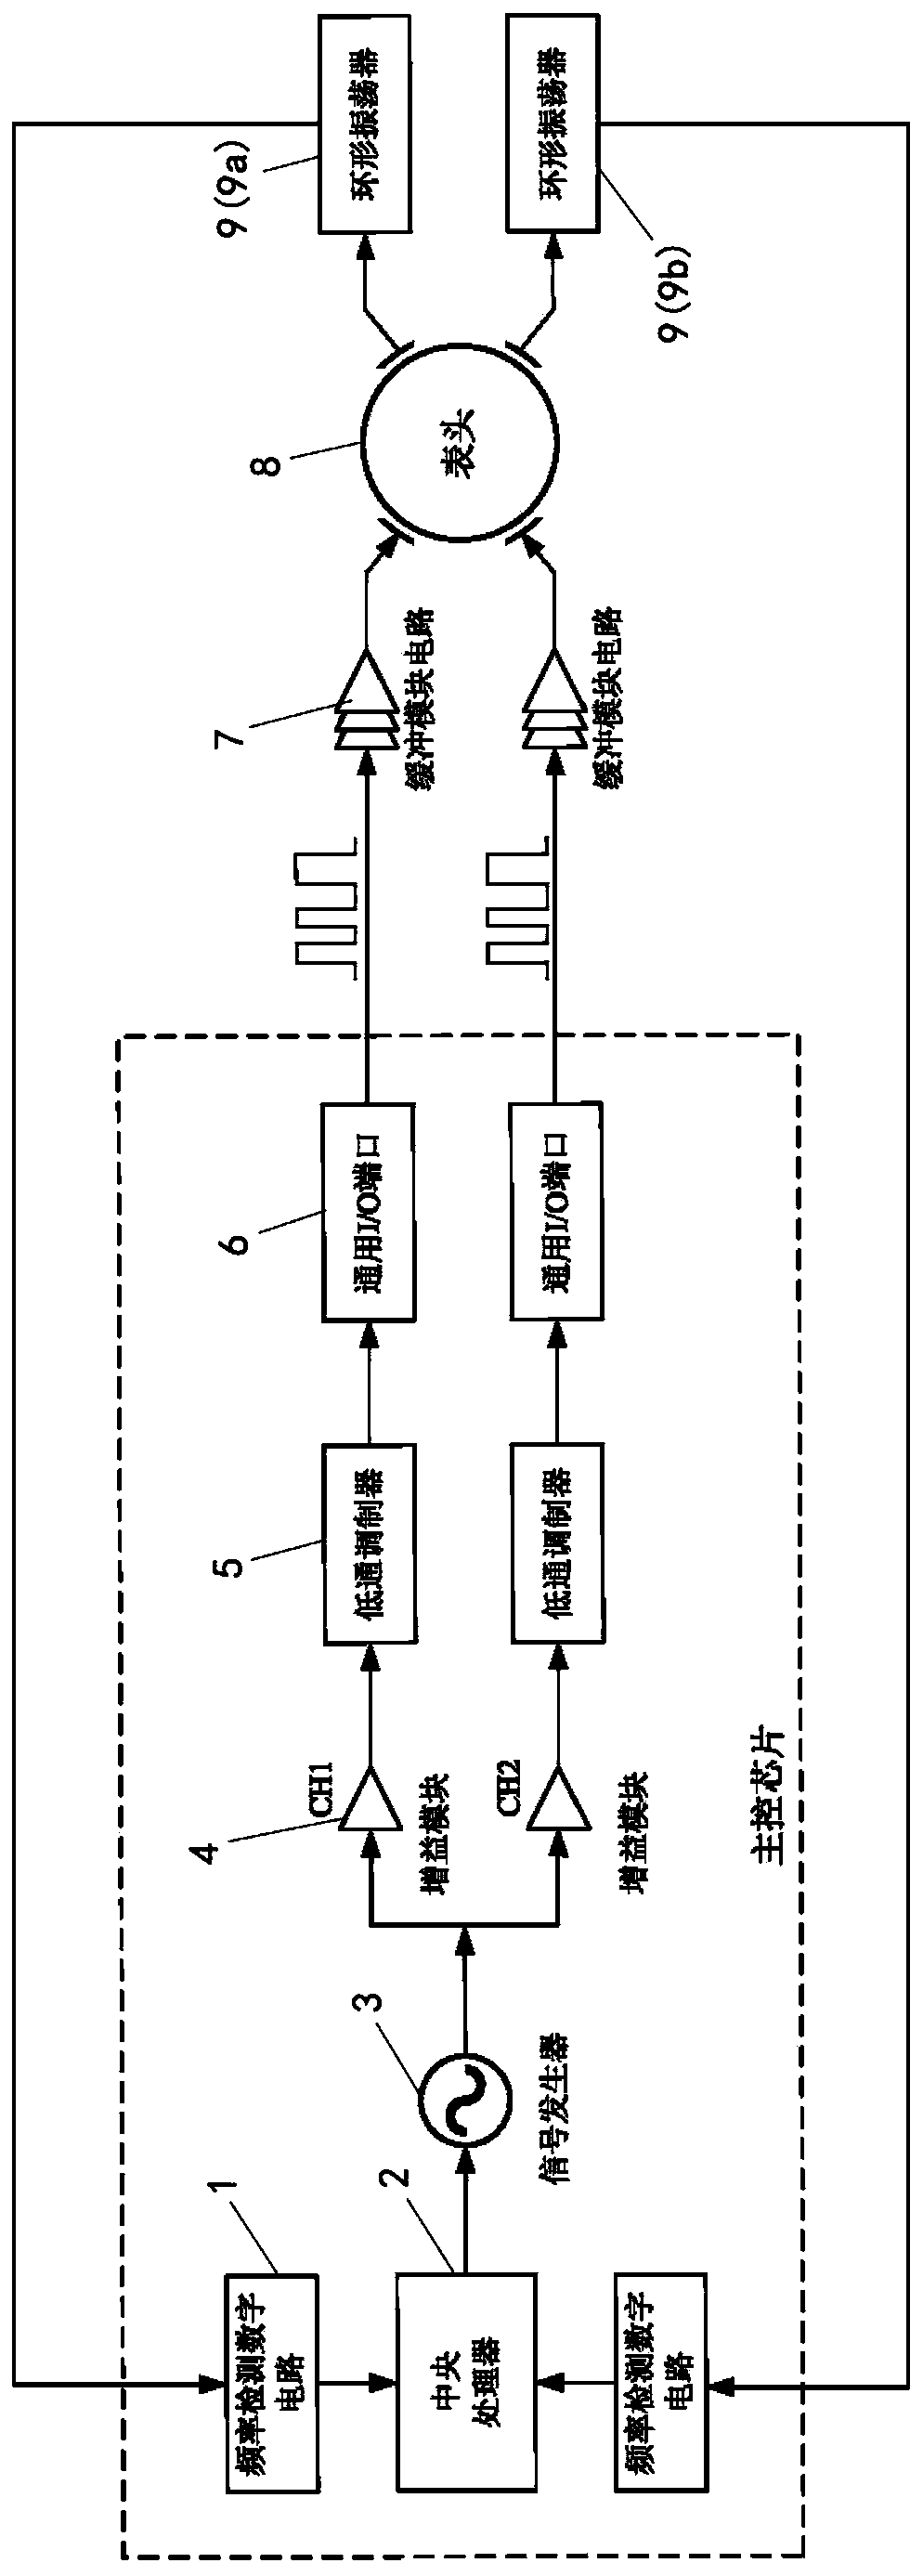 MEMS resonant gyroscope interface circuit and measurement and control system